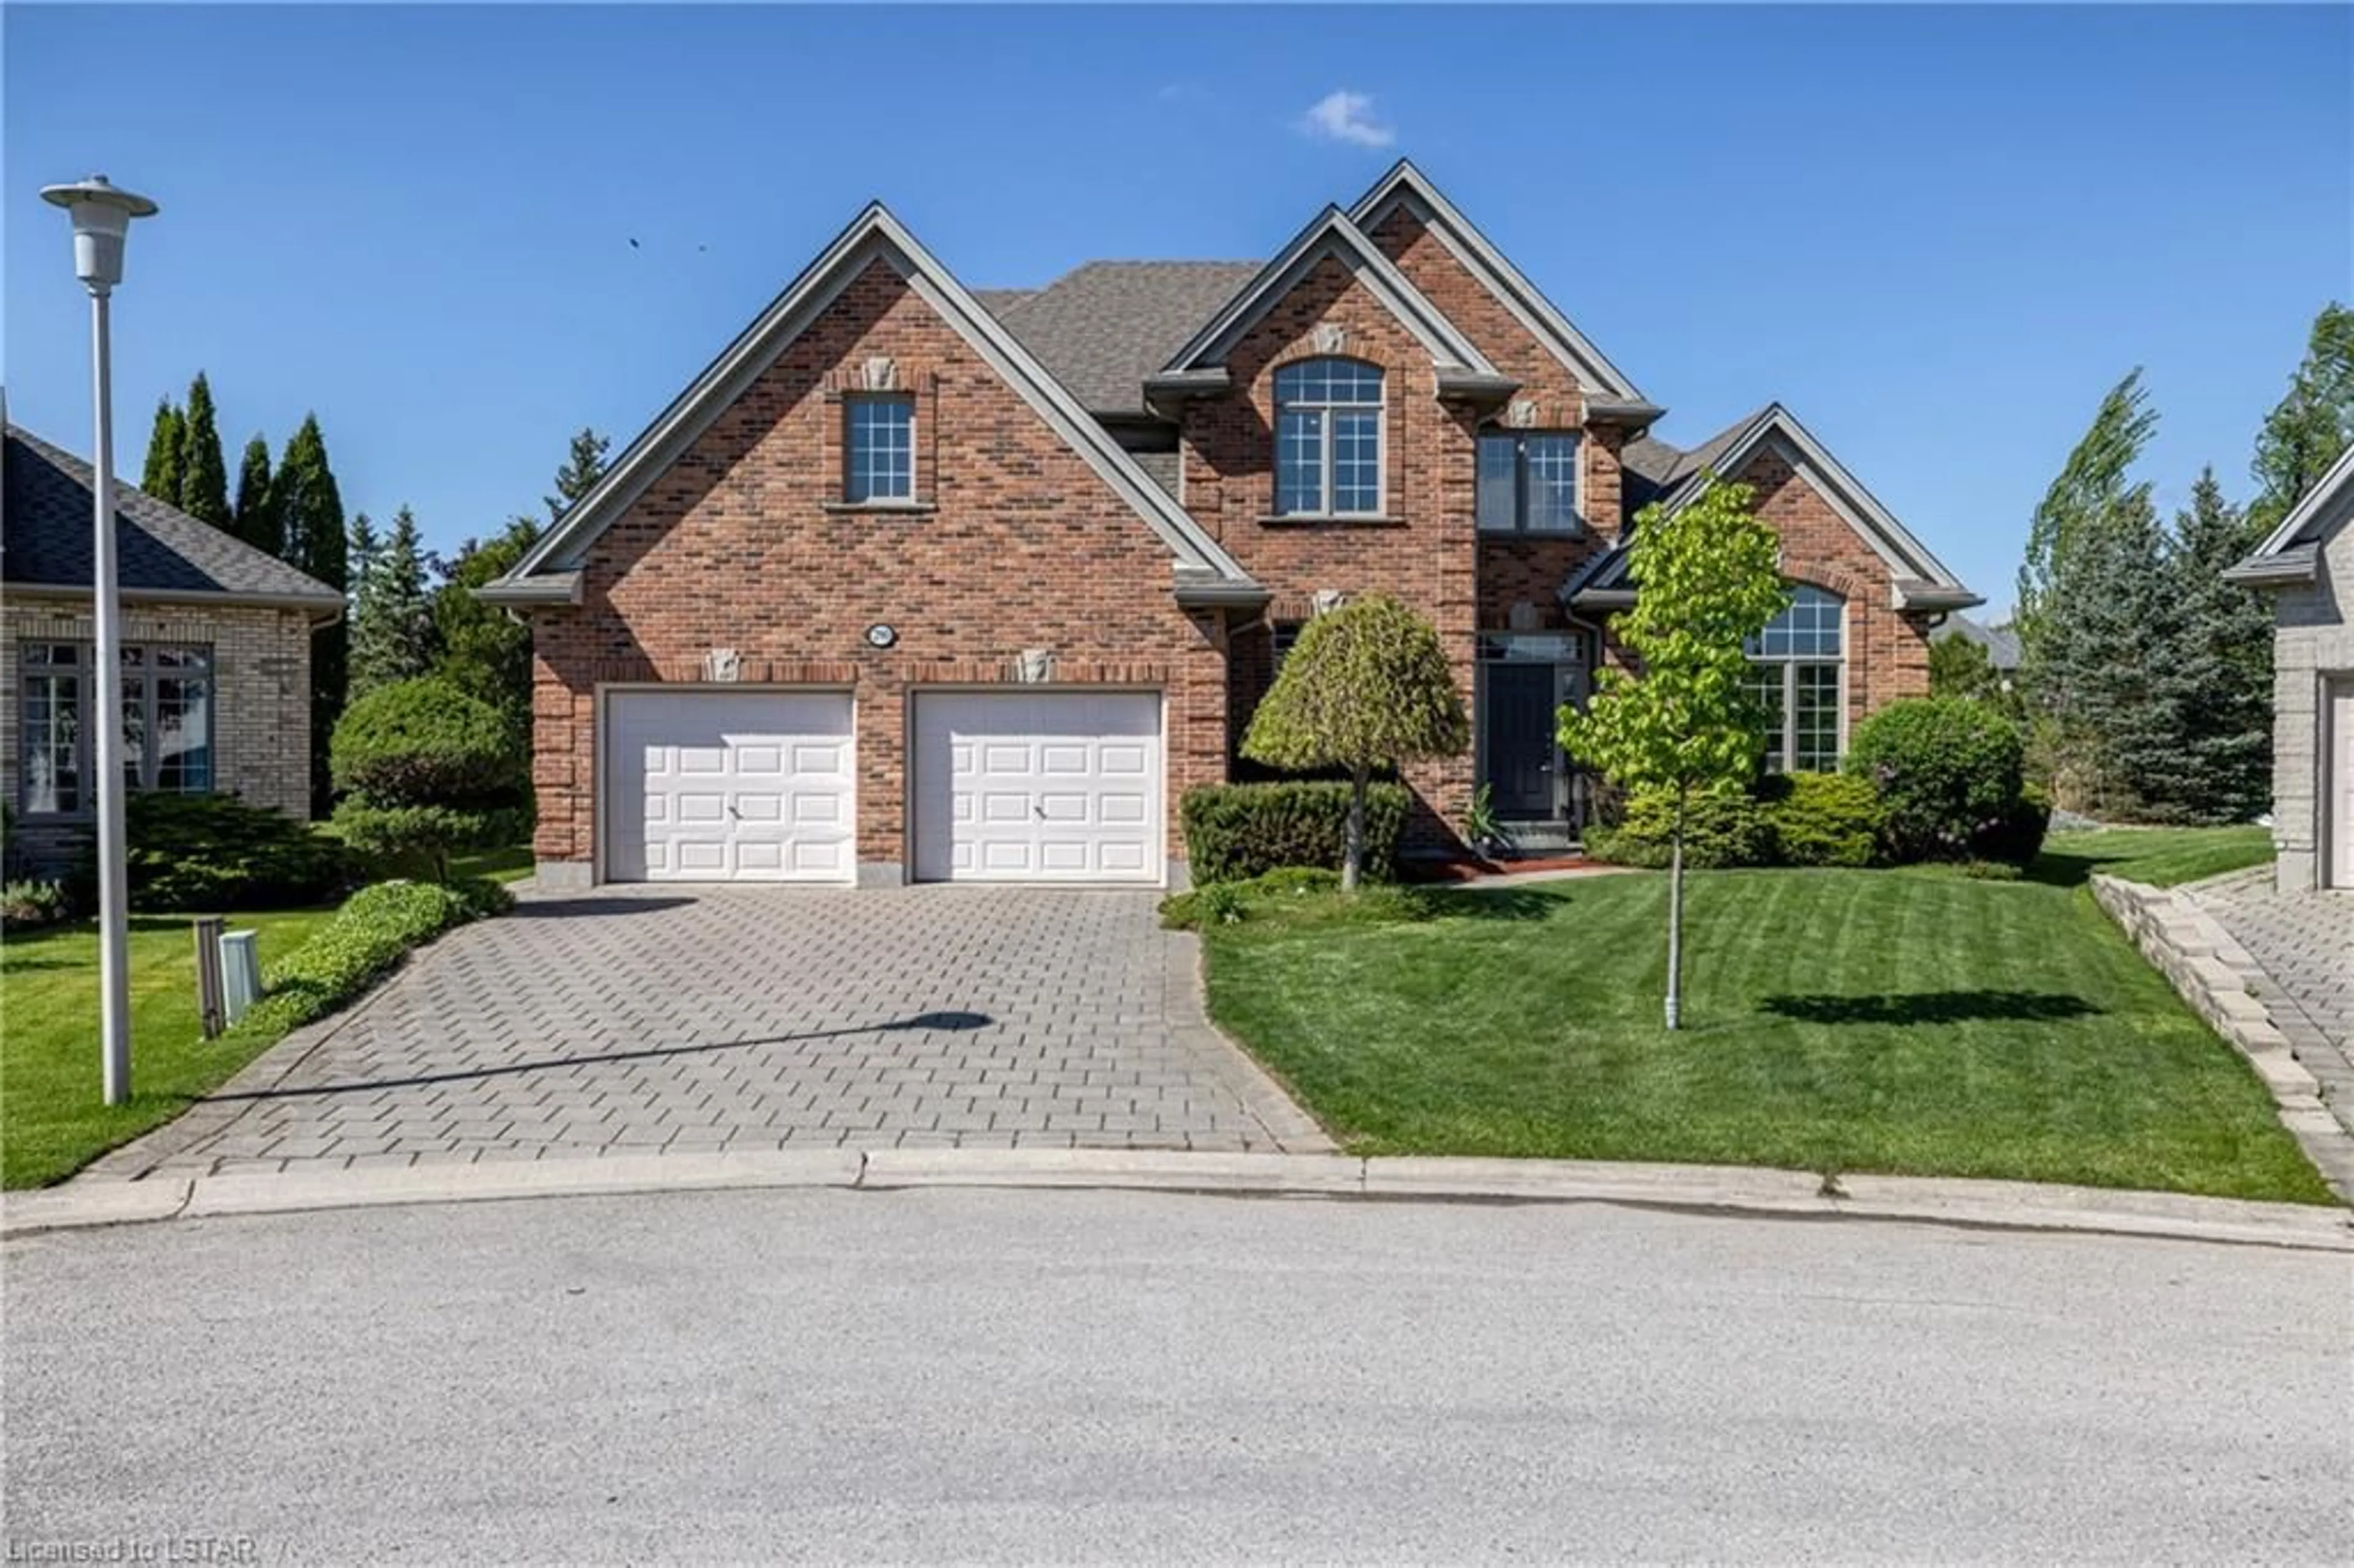 Home with brick exterior material for 290 Louise Pl, London Ontario N6G 5G2